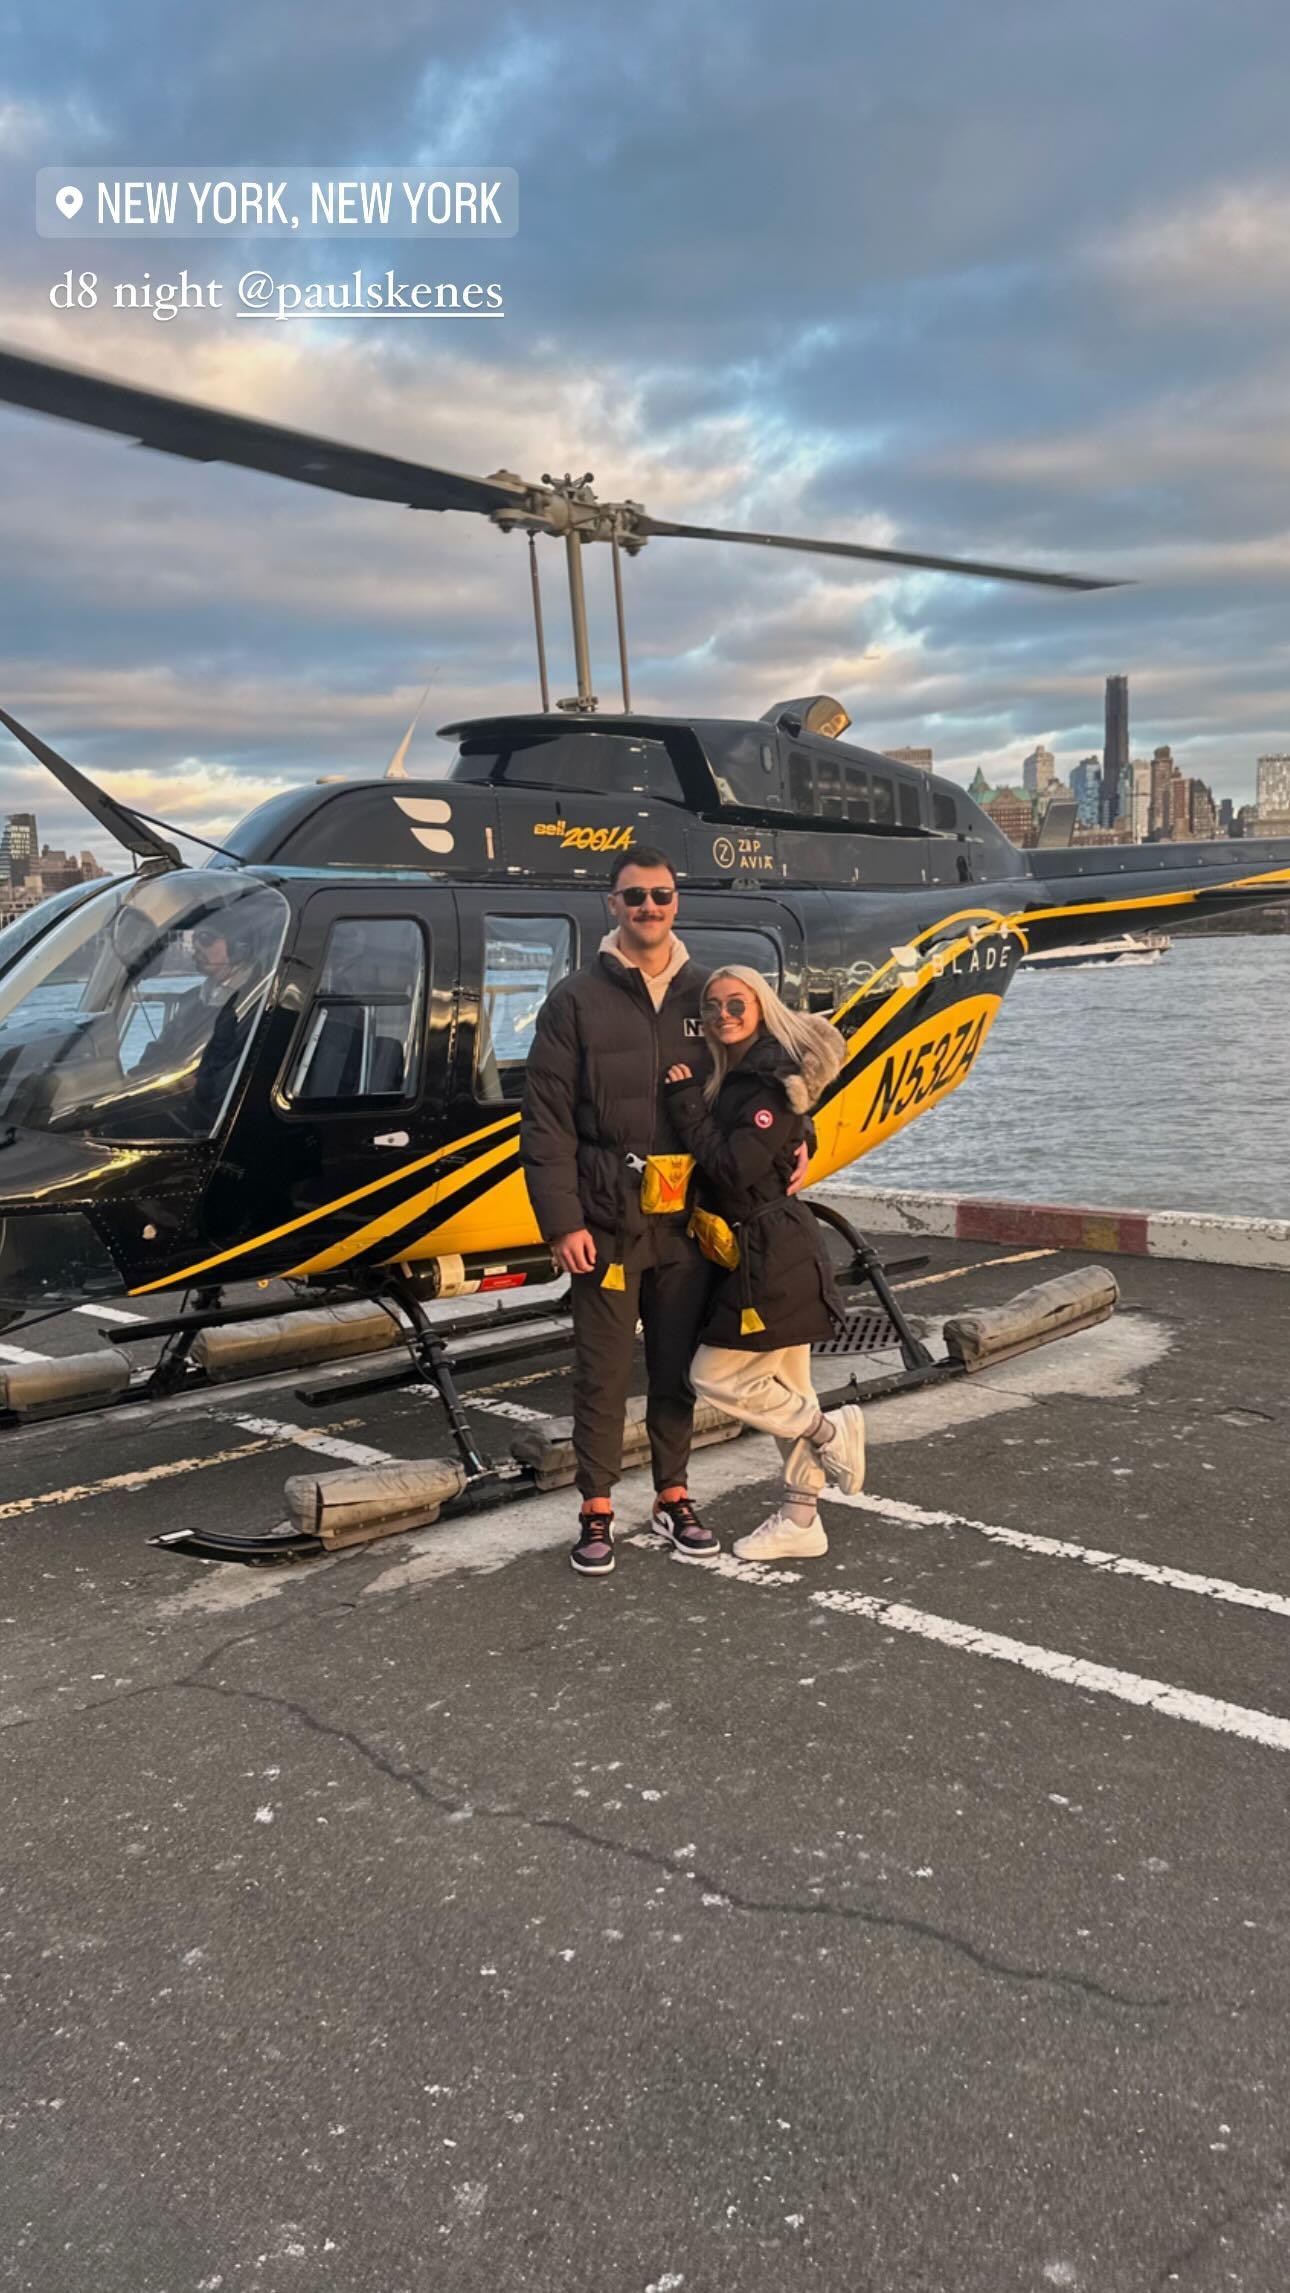 Olivia Dunne and Paul Skenes pose for a picture before taking on a helicopter ride in New York City.